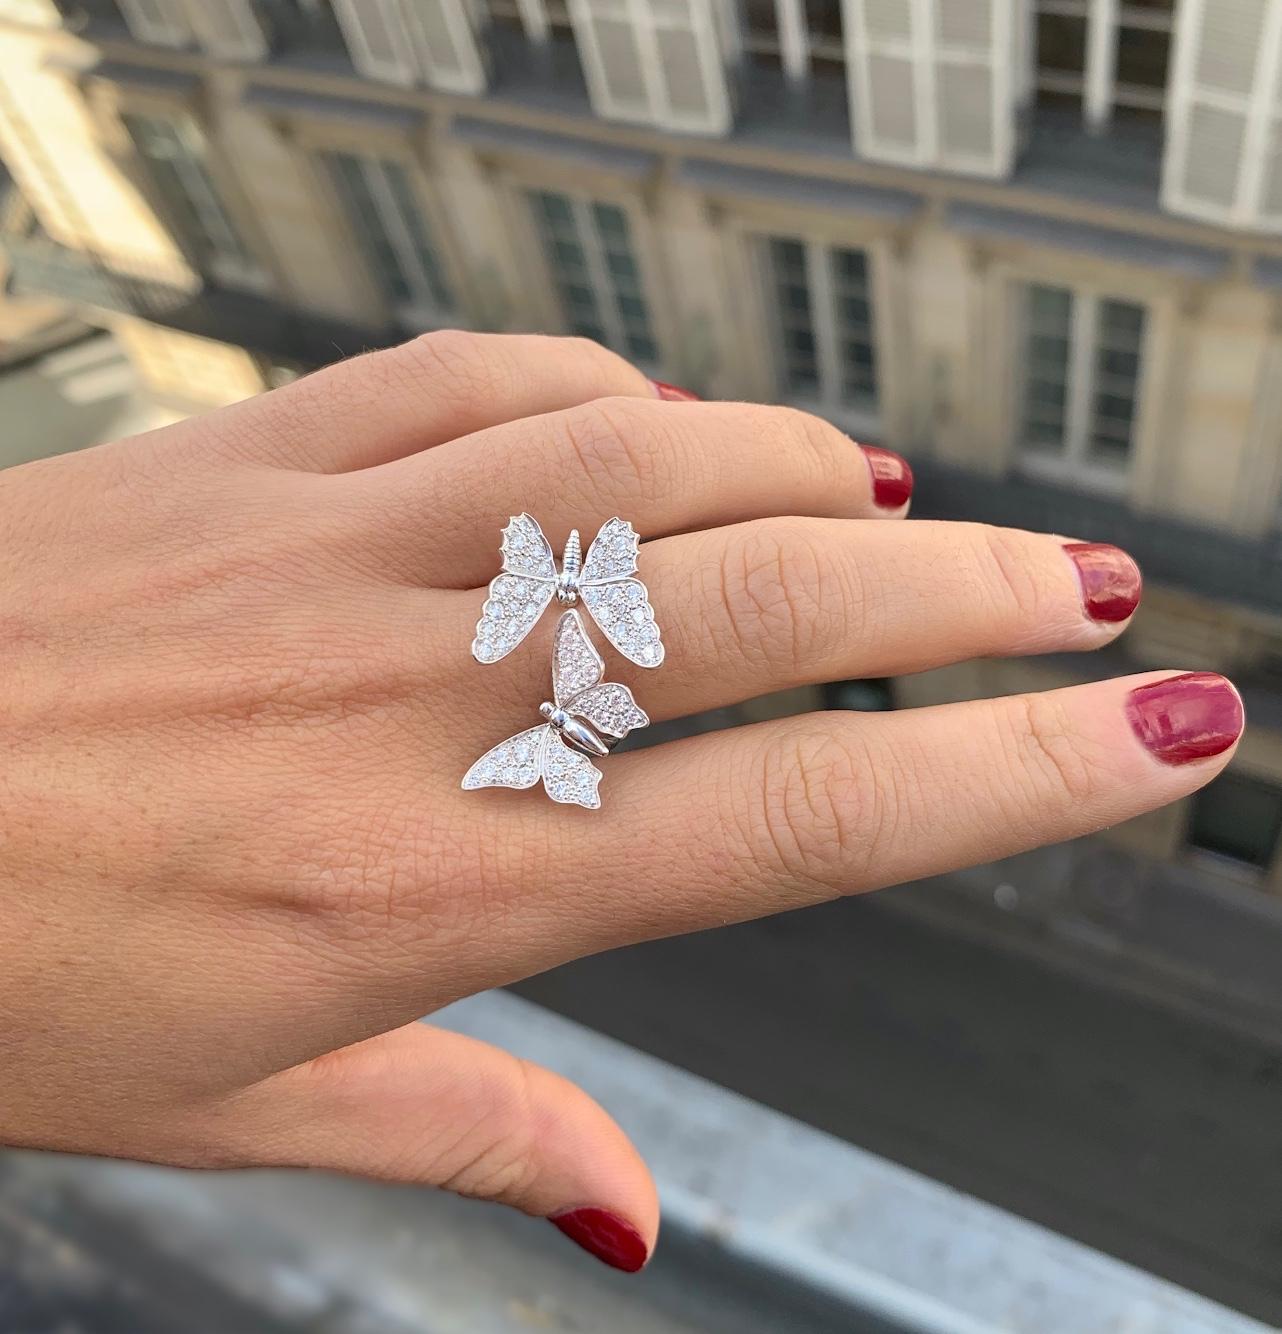 Handcrafted in France in our High Jewelry Paris workshop. Designed by Édéenne, artist and founder of Maison Édéenne, this two Butterfly finger ring is in 18K white gold and set with brilliant-cut white diamonds (F/G color, VVS clarity) totaling 1.46